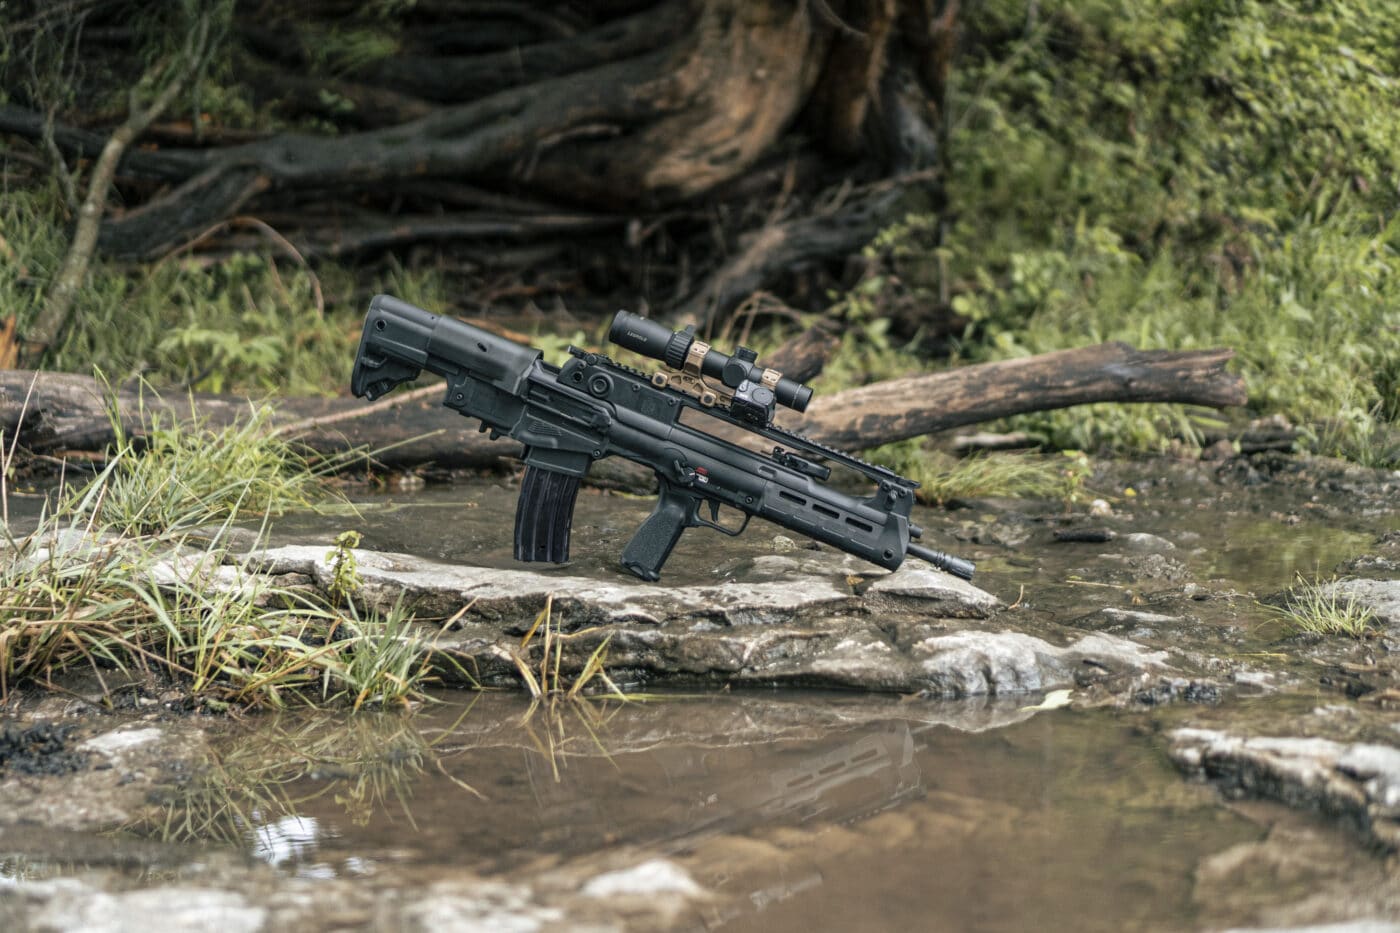 Leupold scope on a Springfield Hellion bullpup rifle leaning up against a log in a streambed